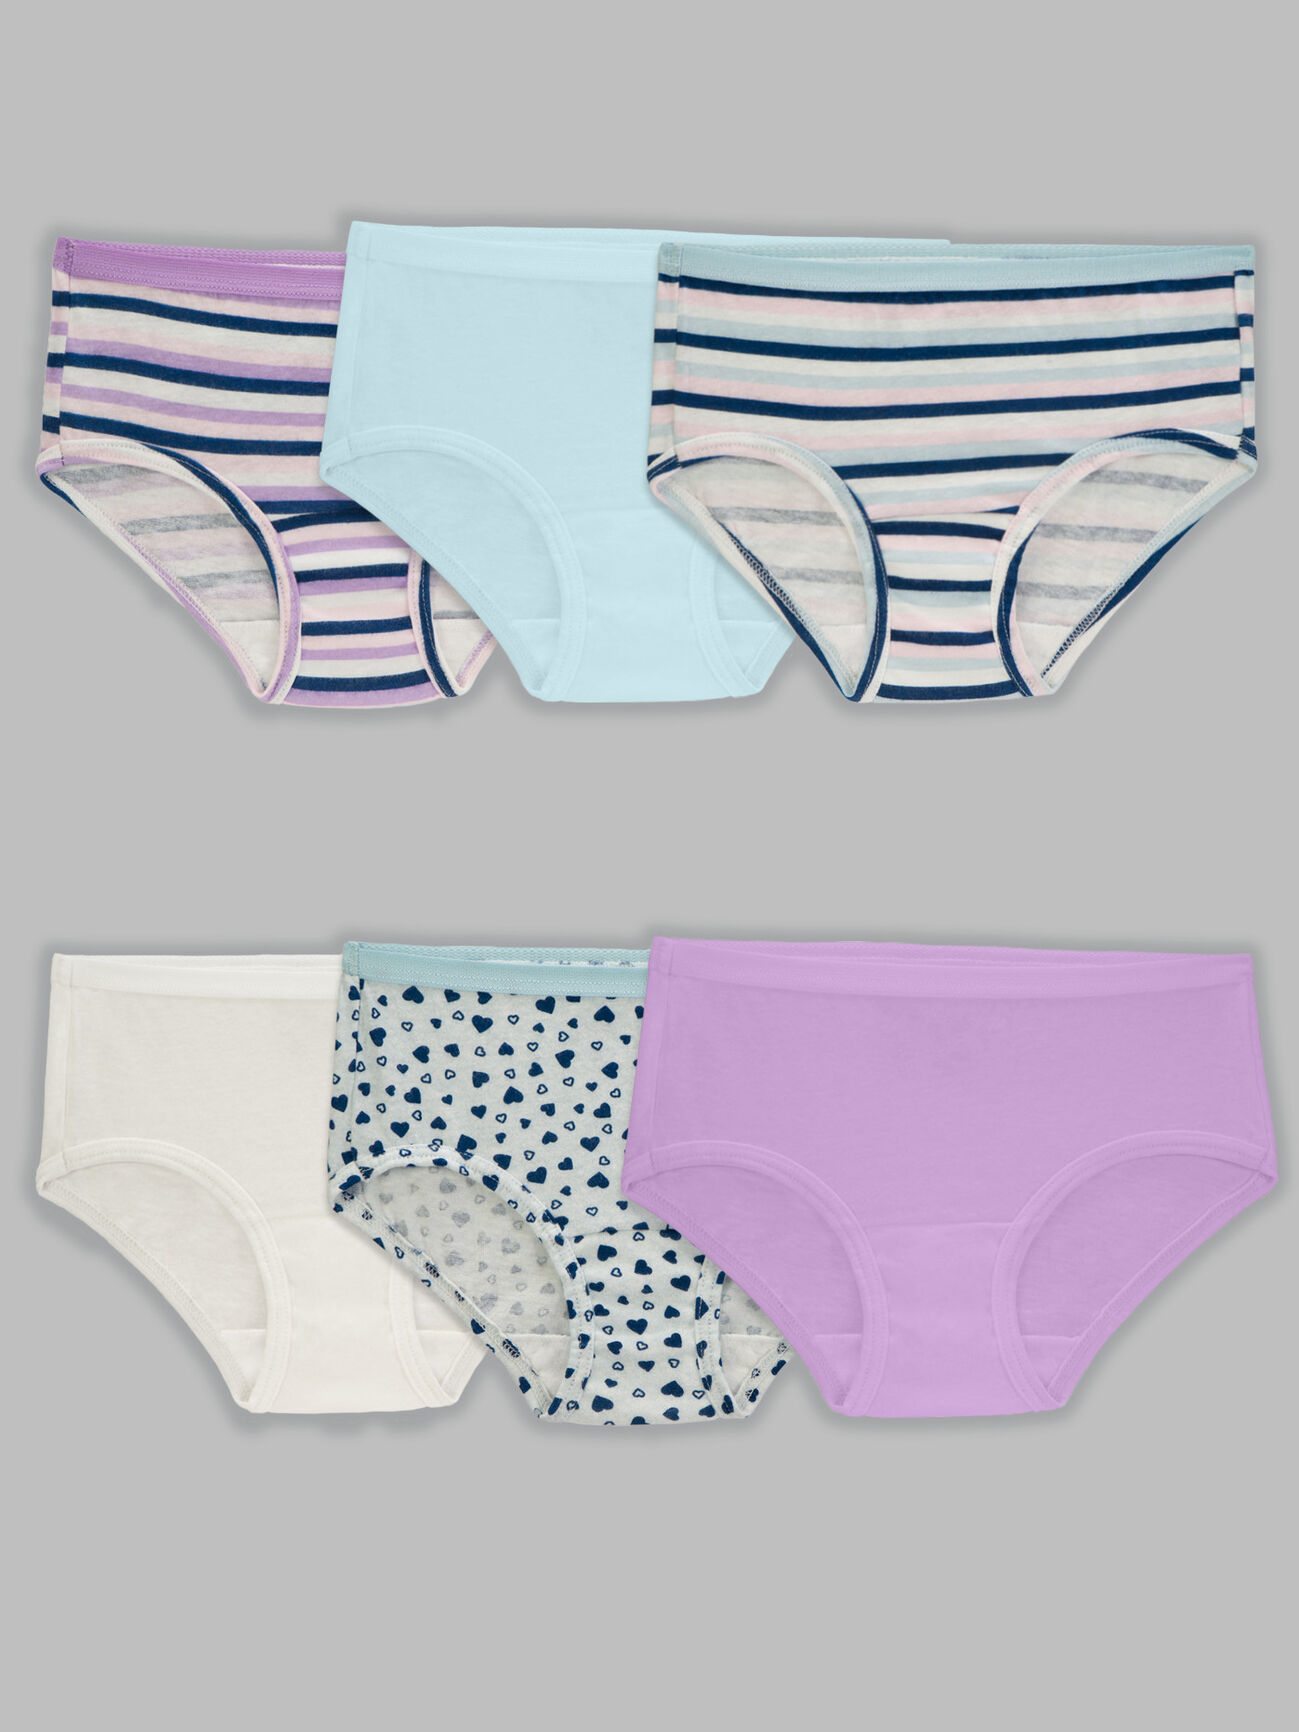 Girls Eversoft Panty Briefs Underwear Assorted Color - Size 12 - Pack of 6